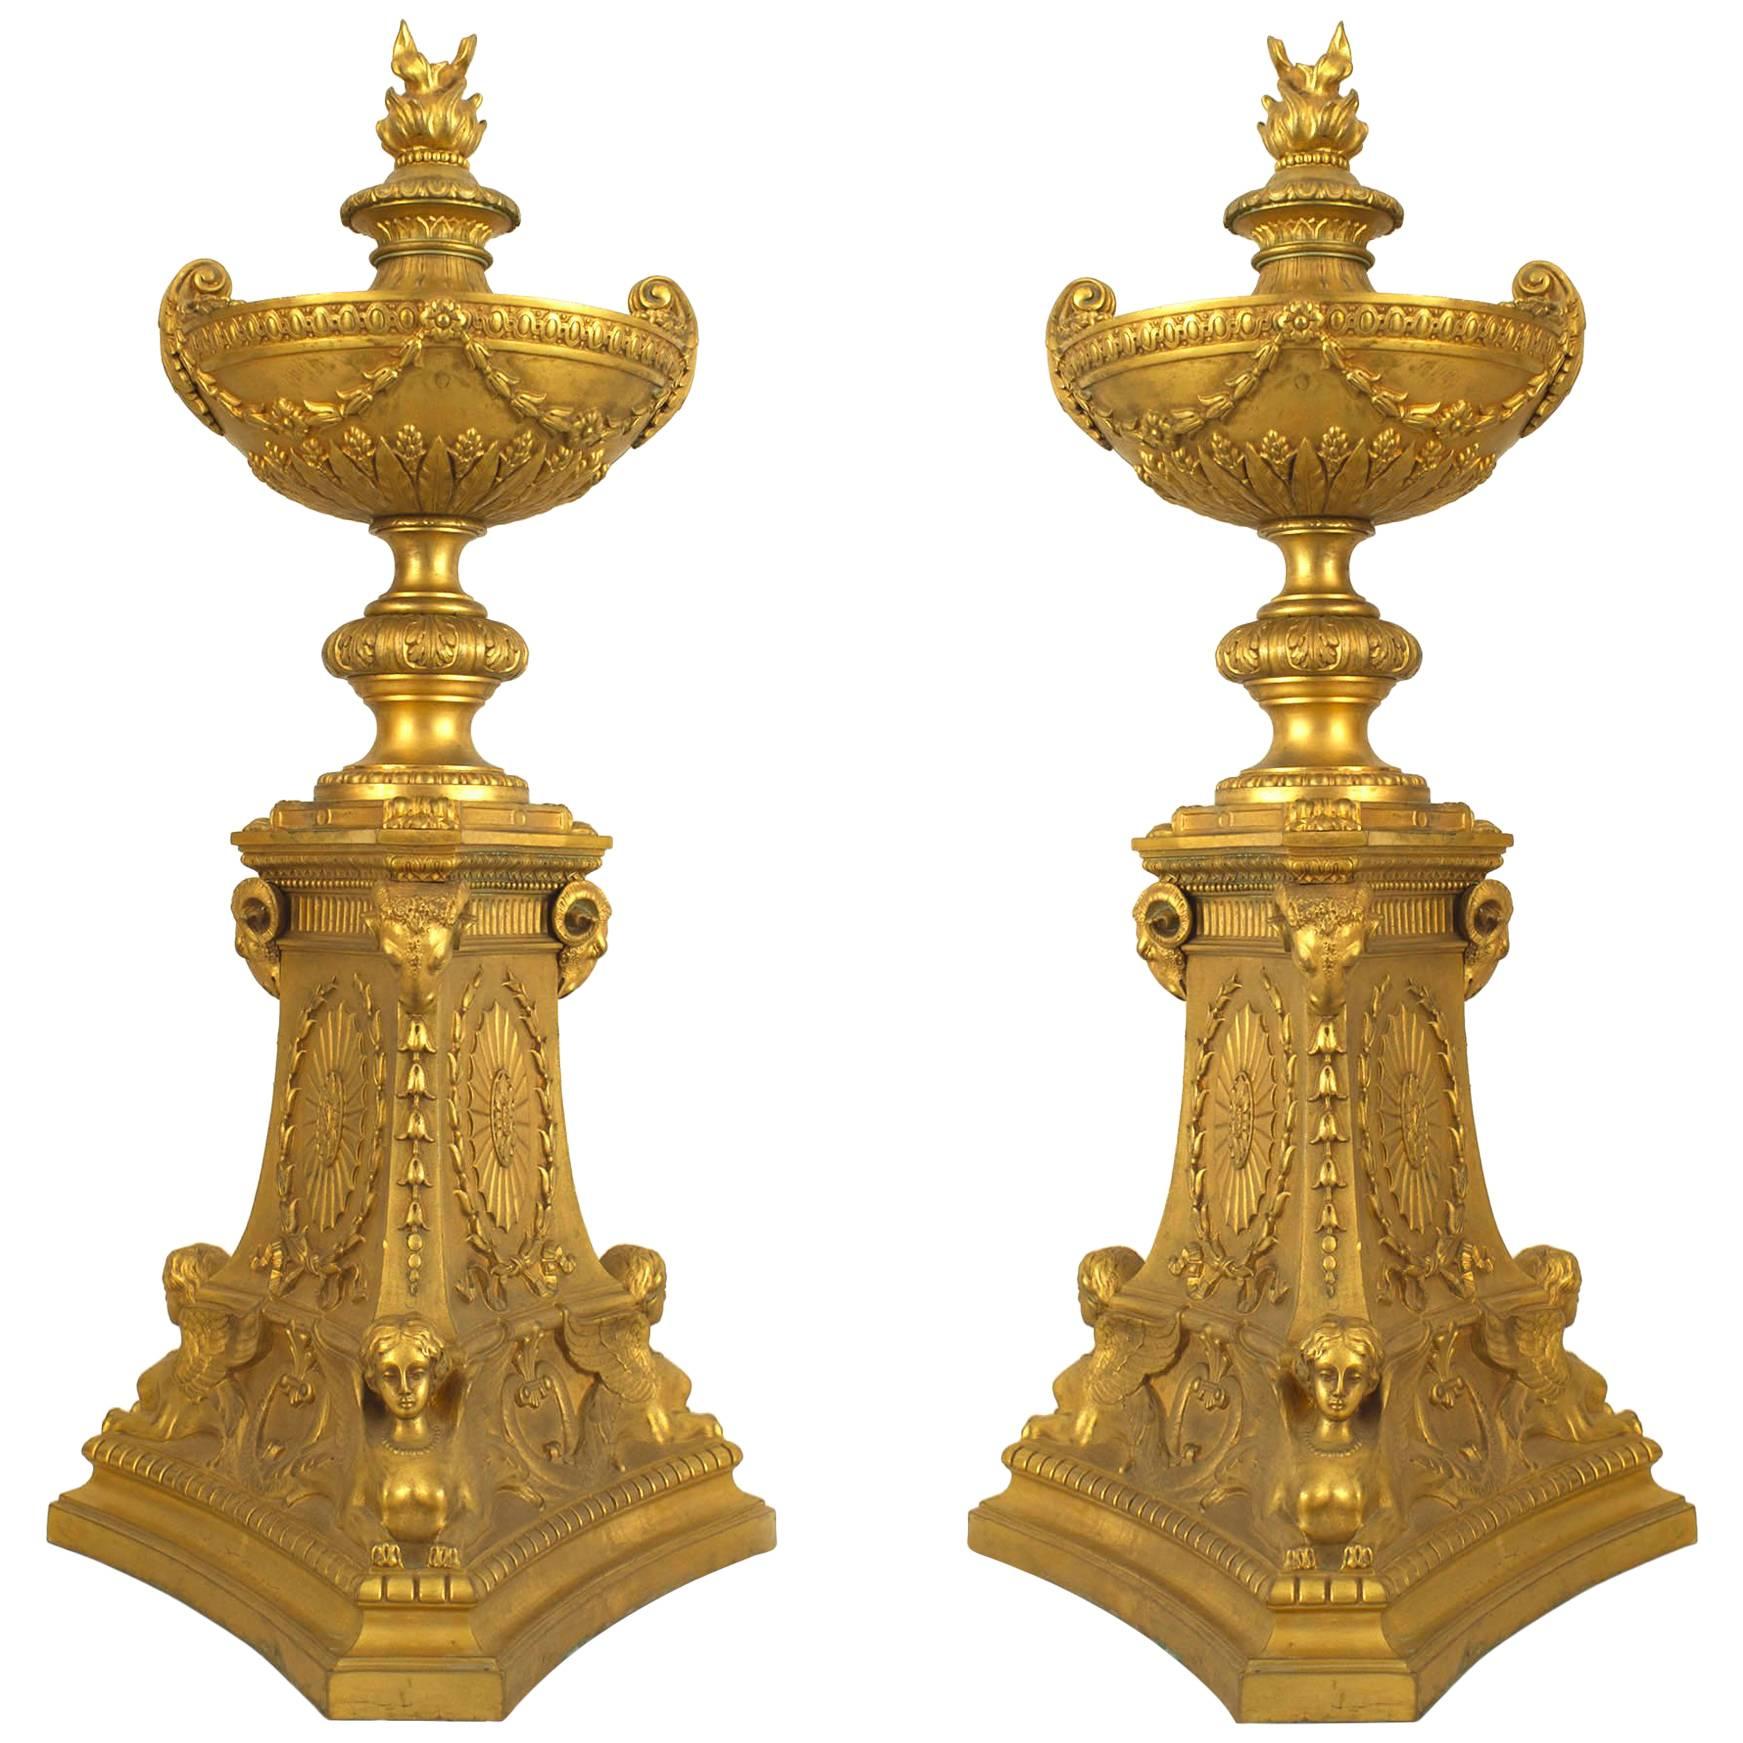 Pair of French Empire Style Gilt Bronze Urns